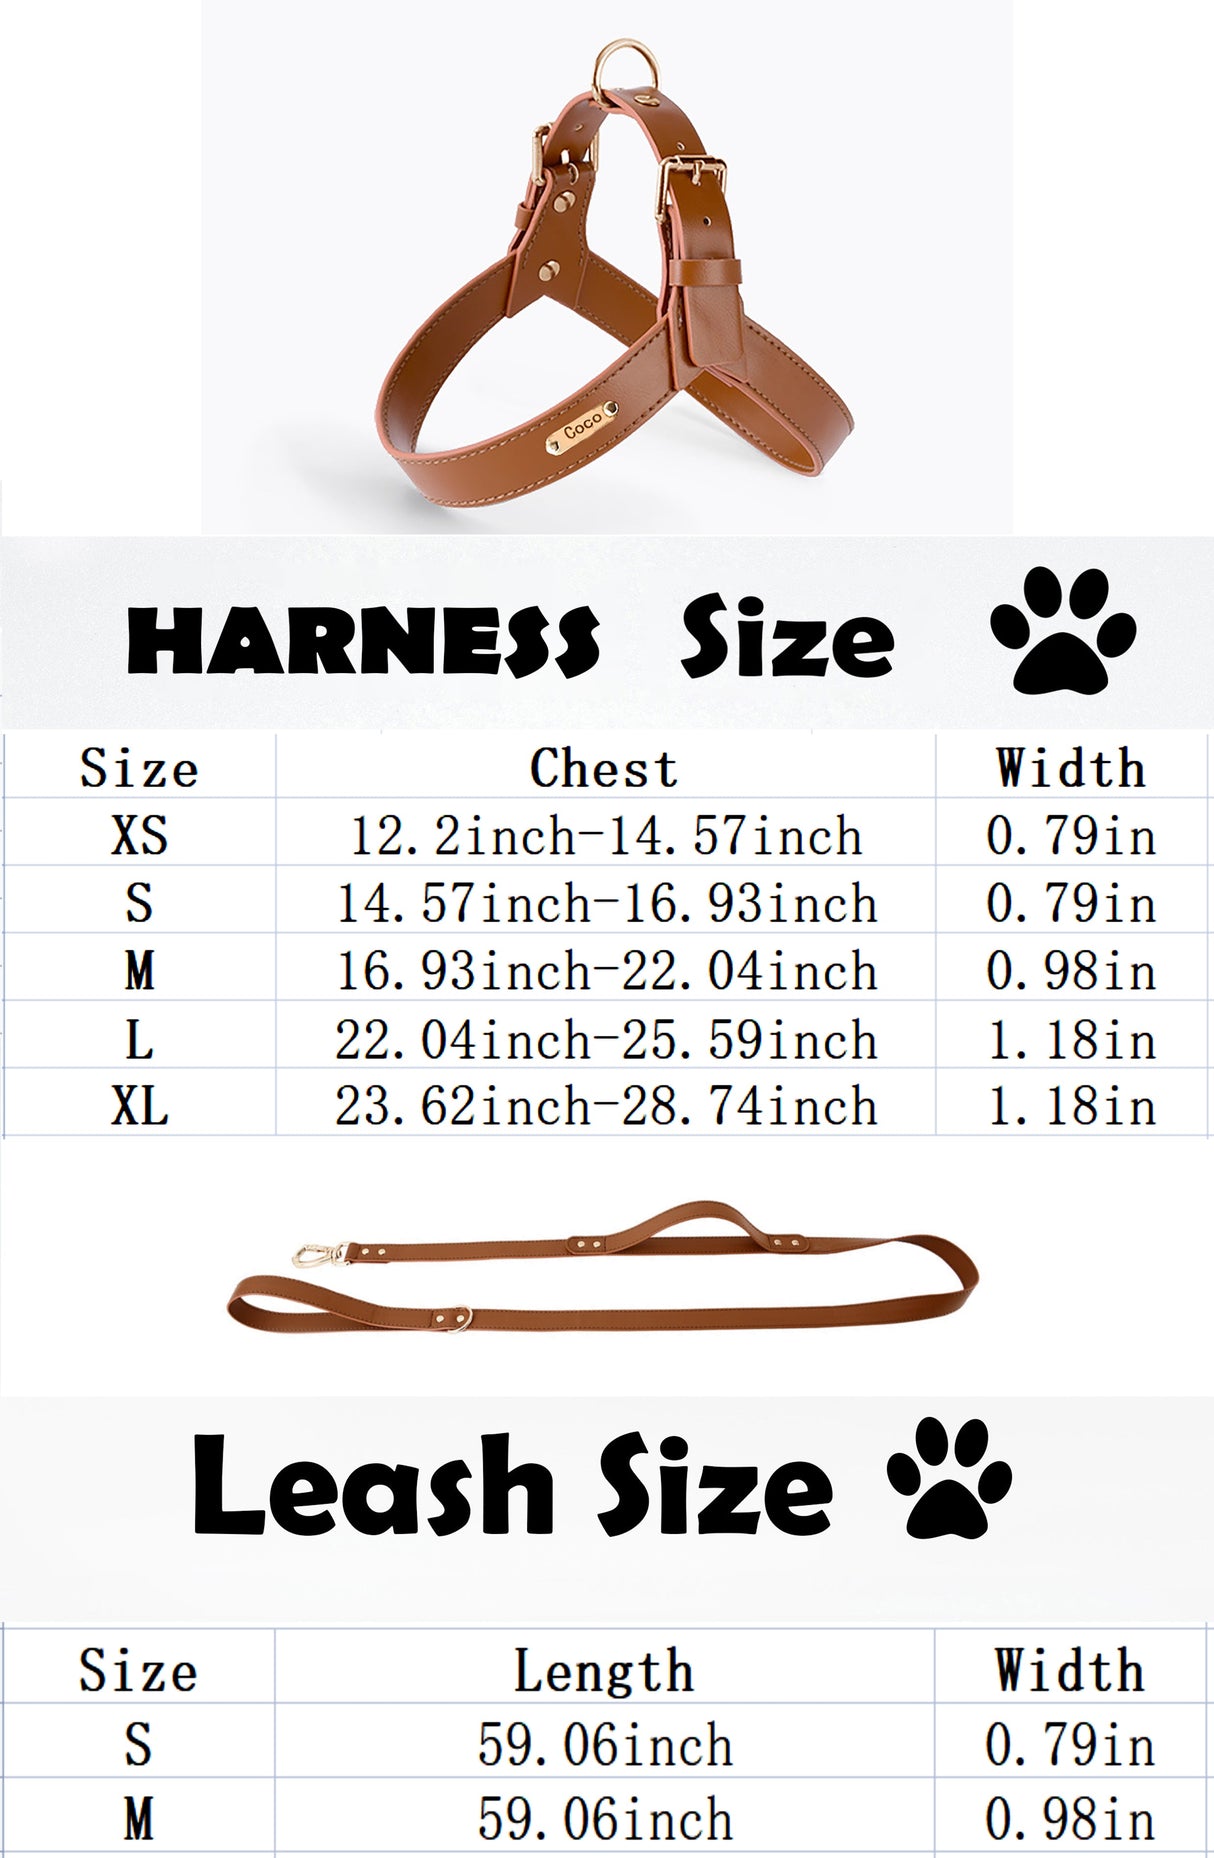 GEX Personalized Large Dog Leather Harness and Leash Set - GexWorldwide